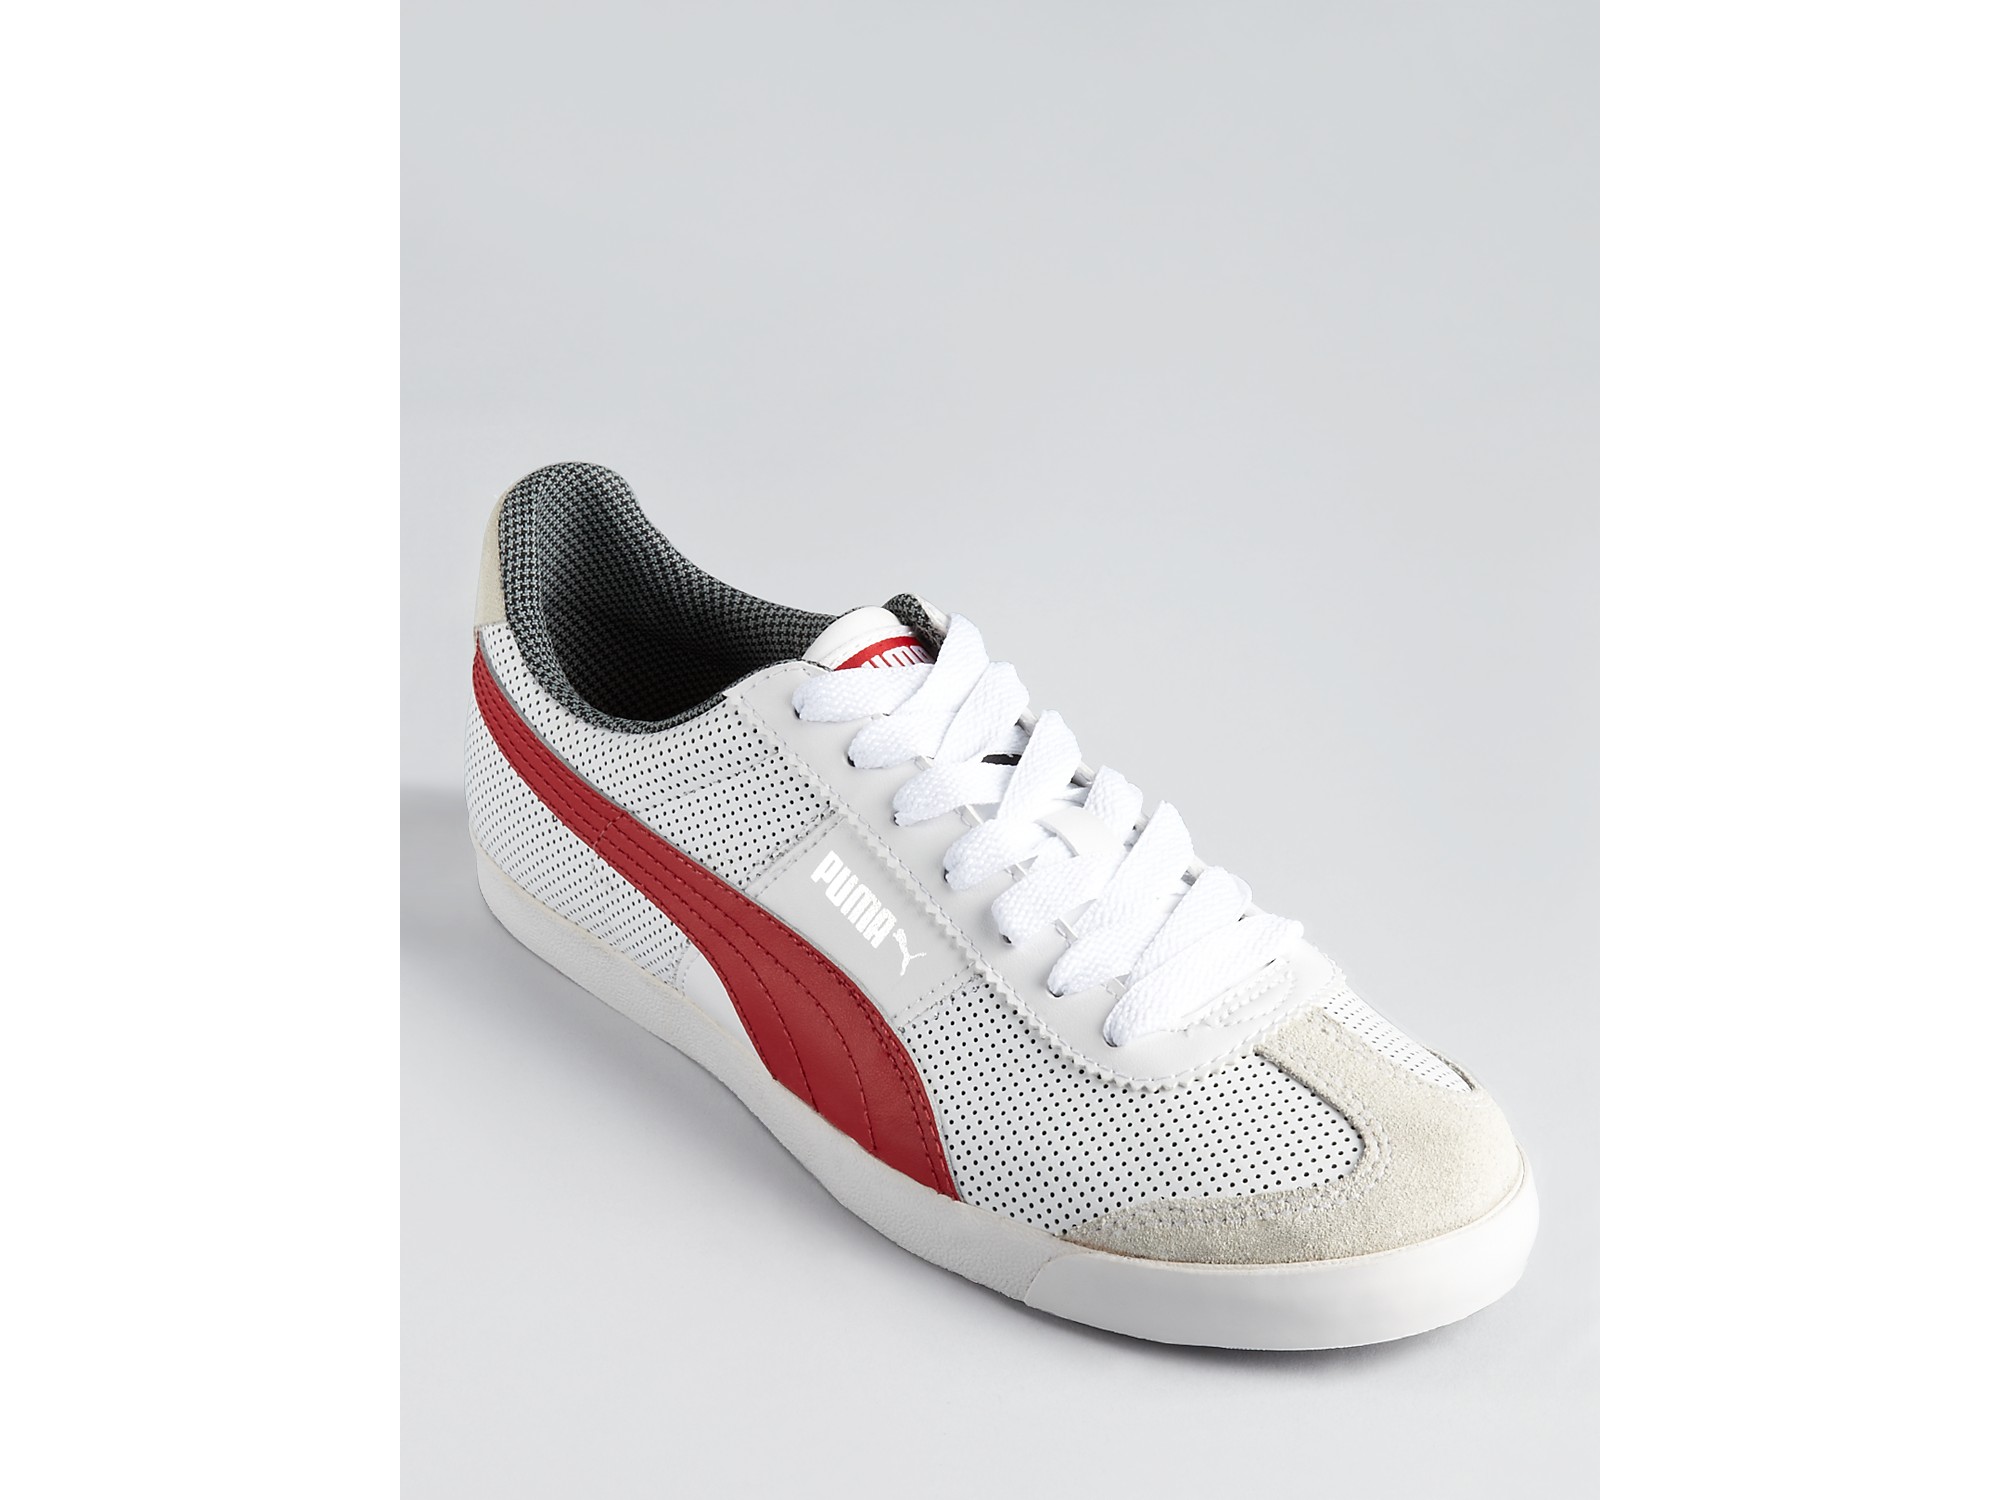 PUMA Roma Low Profile Casual Sneakers in White Red (Natural) for Men - Lyst